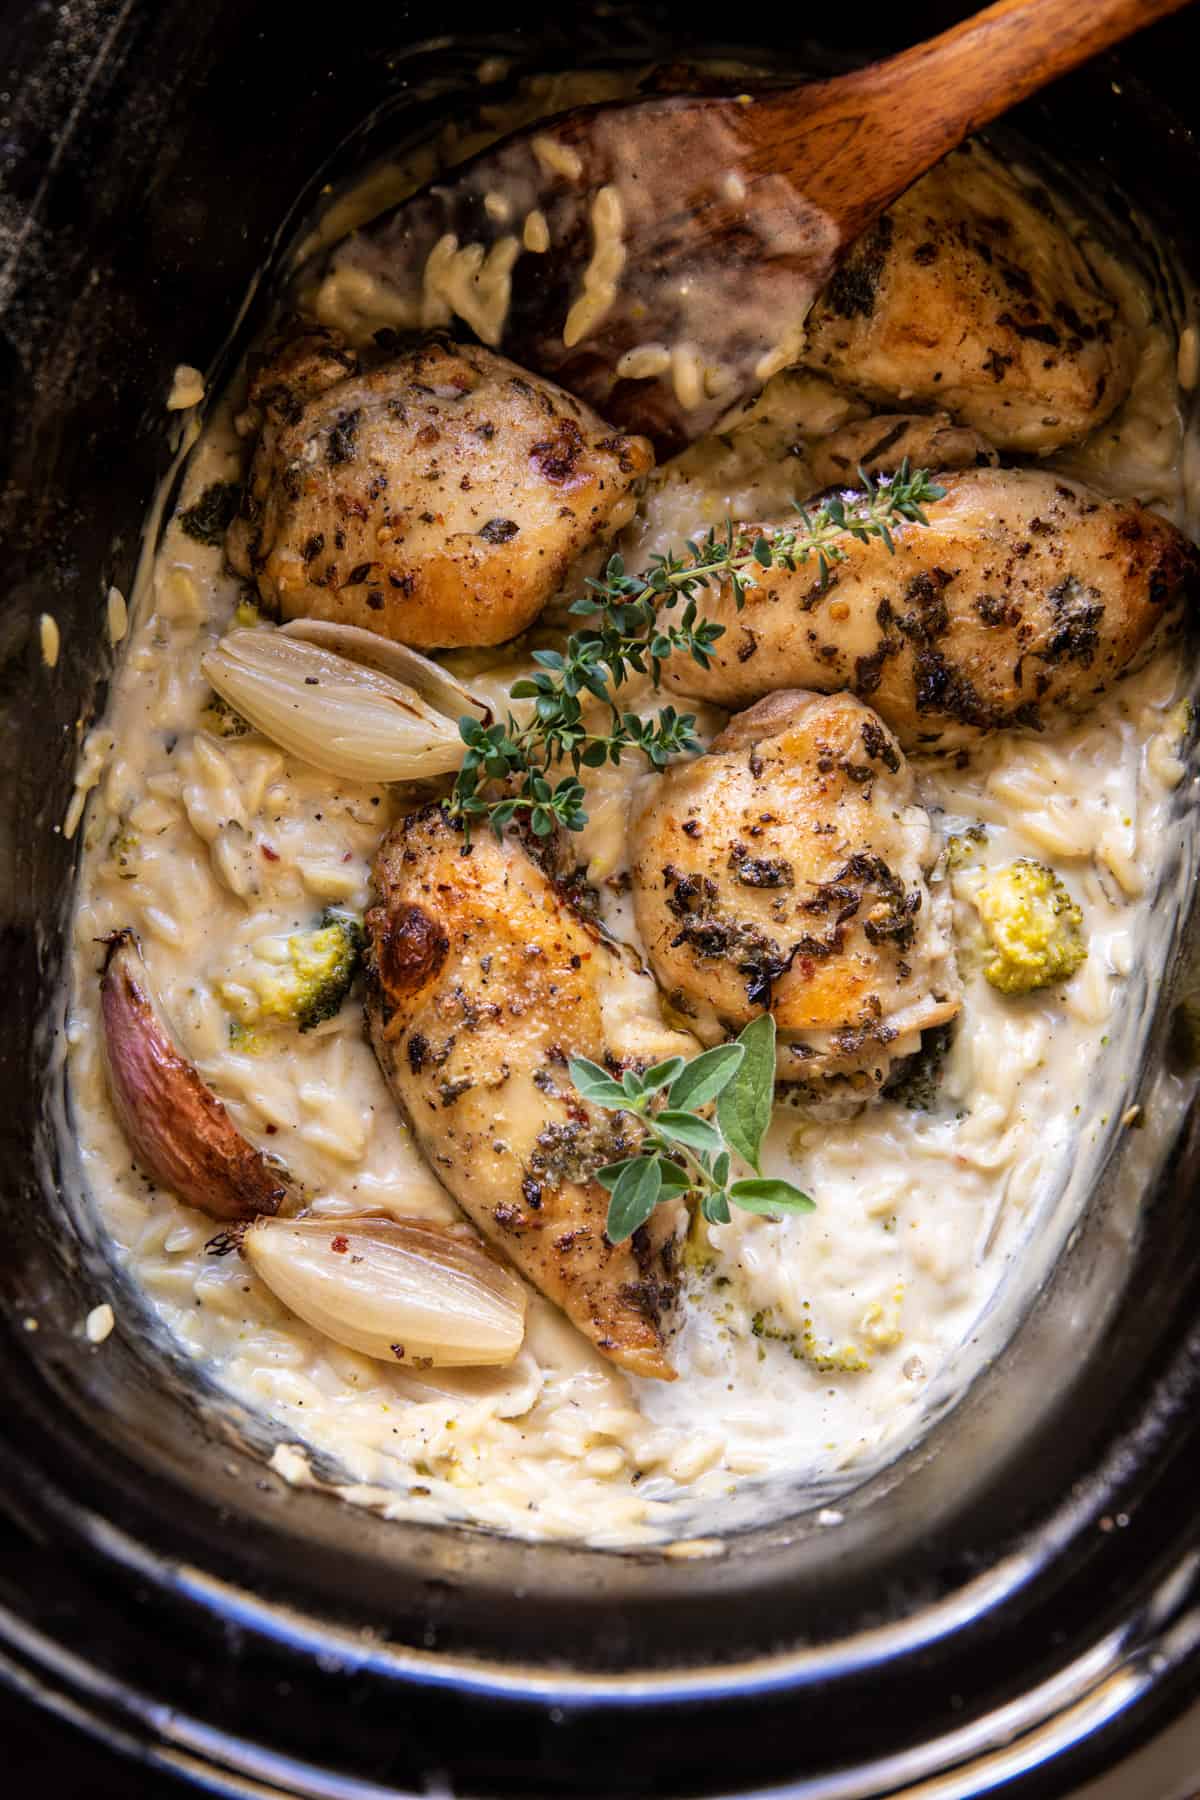 Slow Cooker Mustard Herb Chicken and Creamy Orzo | halfbakedharvest.com